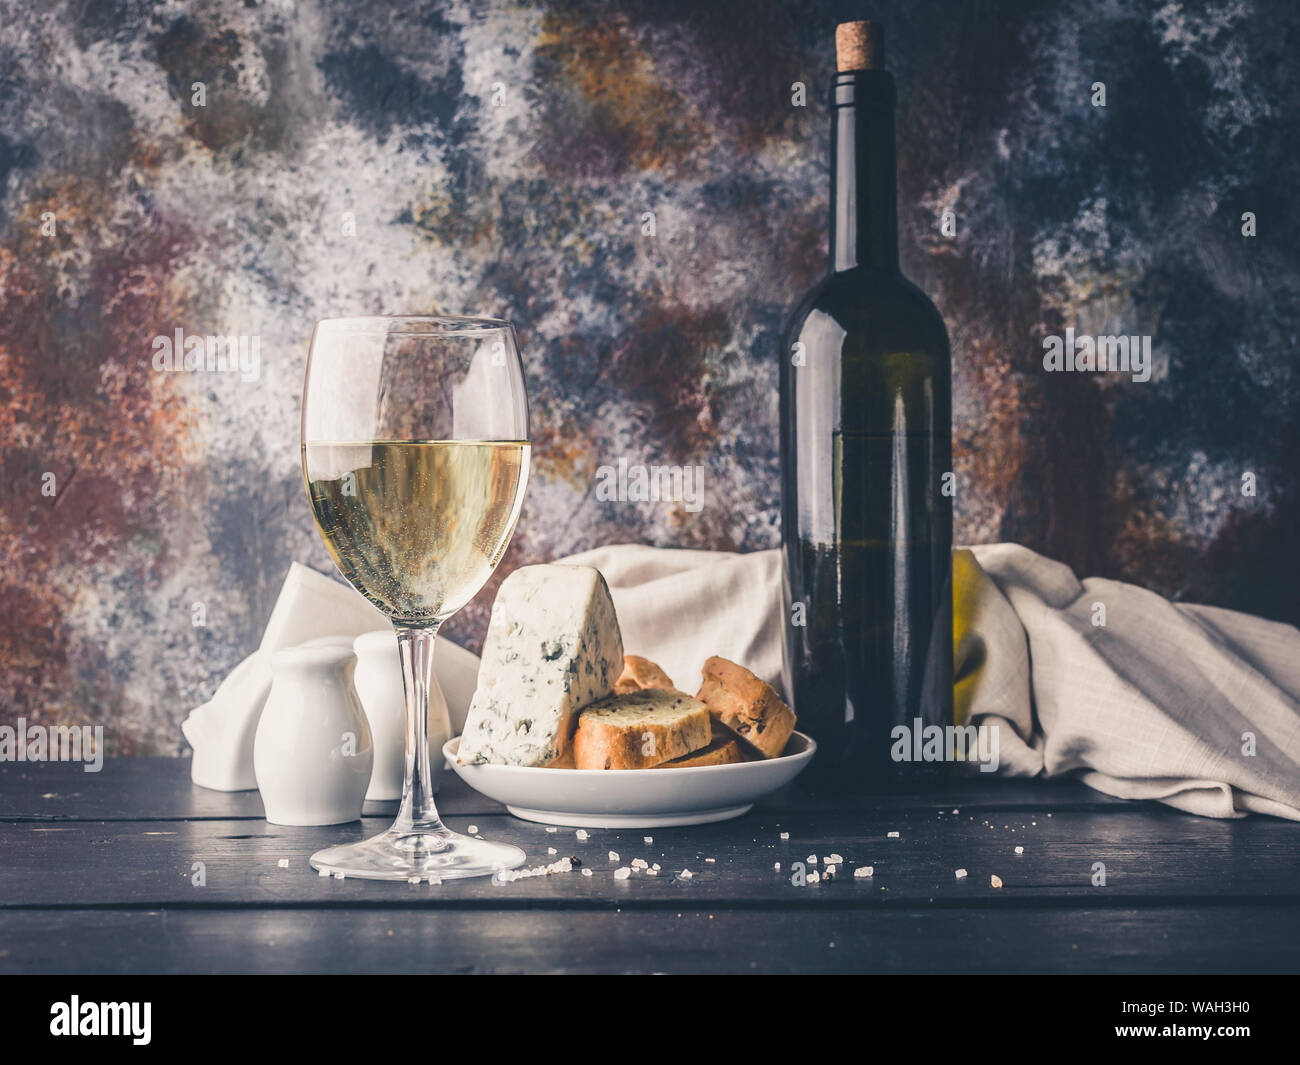 Still life a glass of white wine, cheese, bread and a bottle of wine. Low key lighting Stock Photo